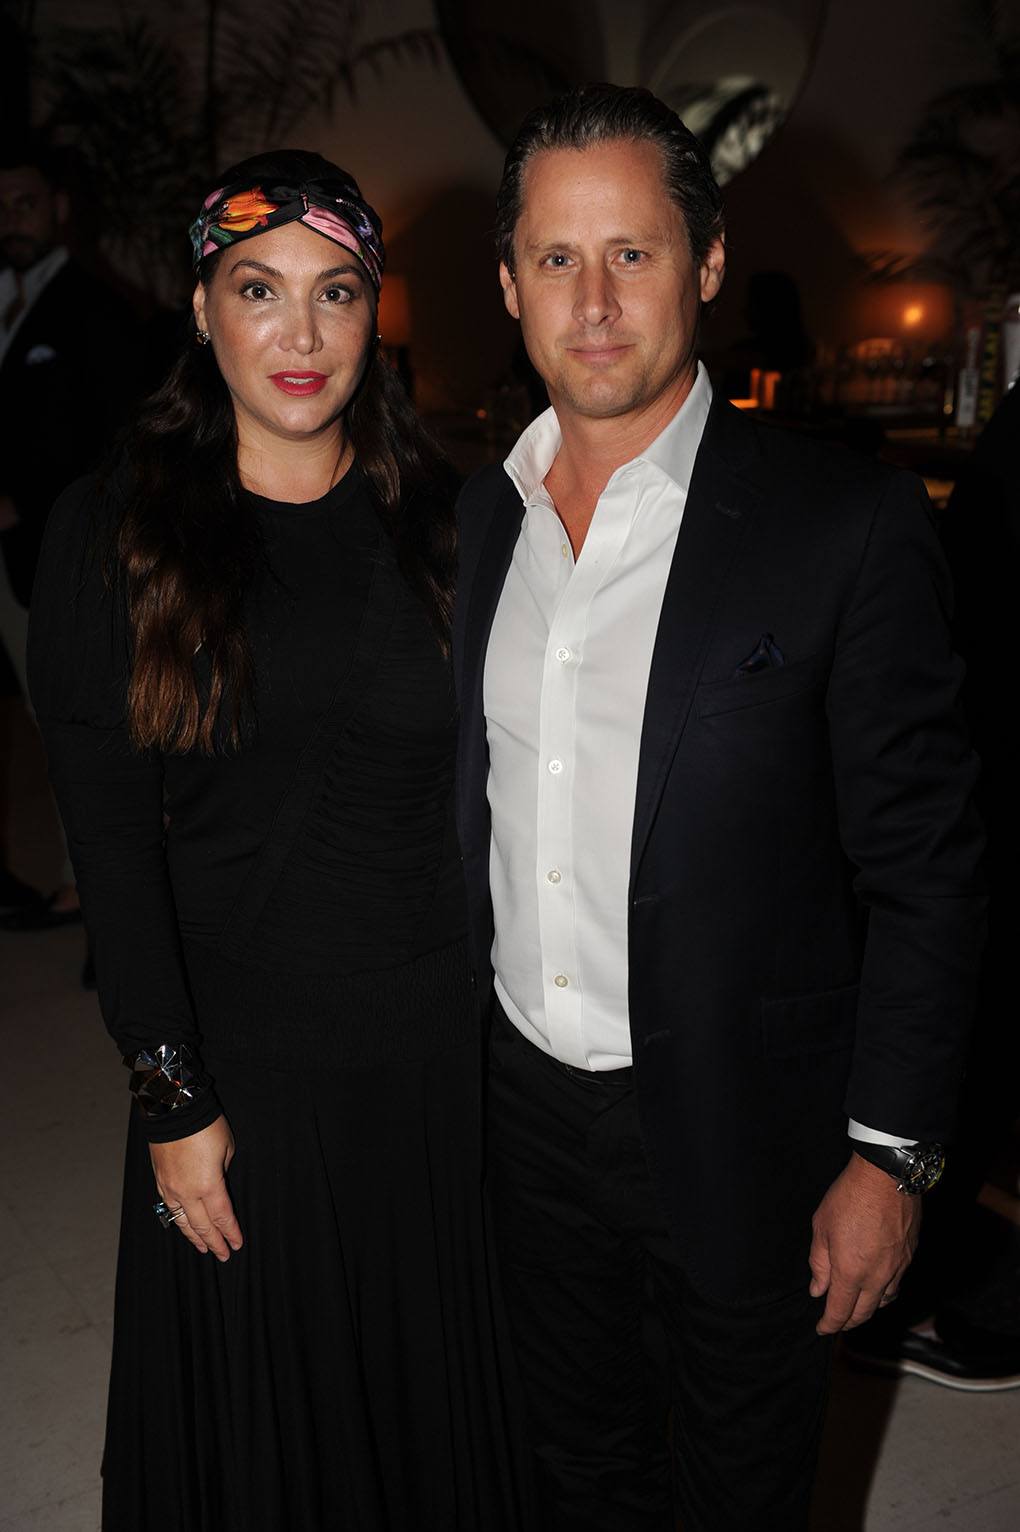 Soledad Lowe & Justin Lowe at Le Sirenuse Miami for De Beers Bal Harbour boutique opening celebration